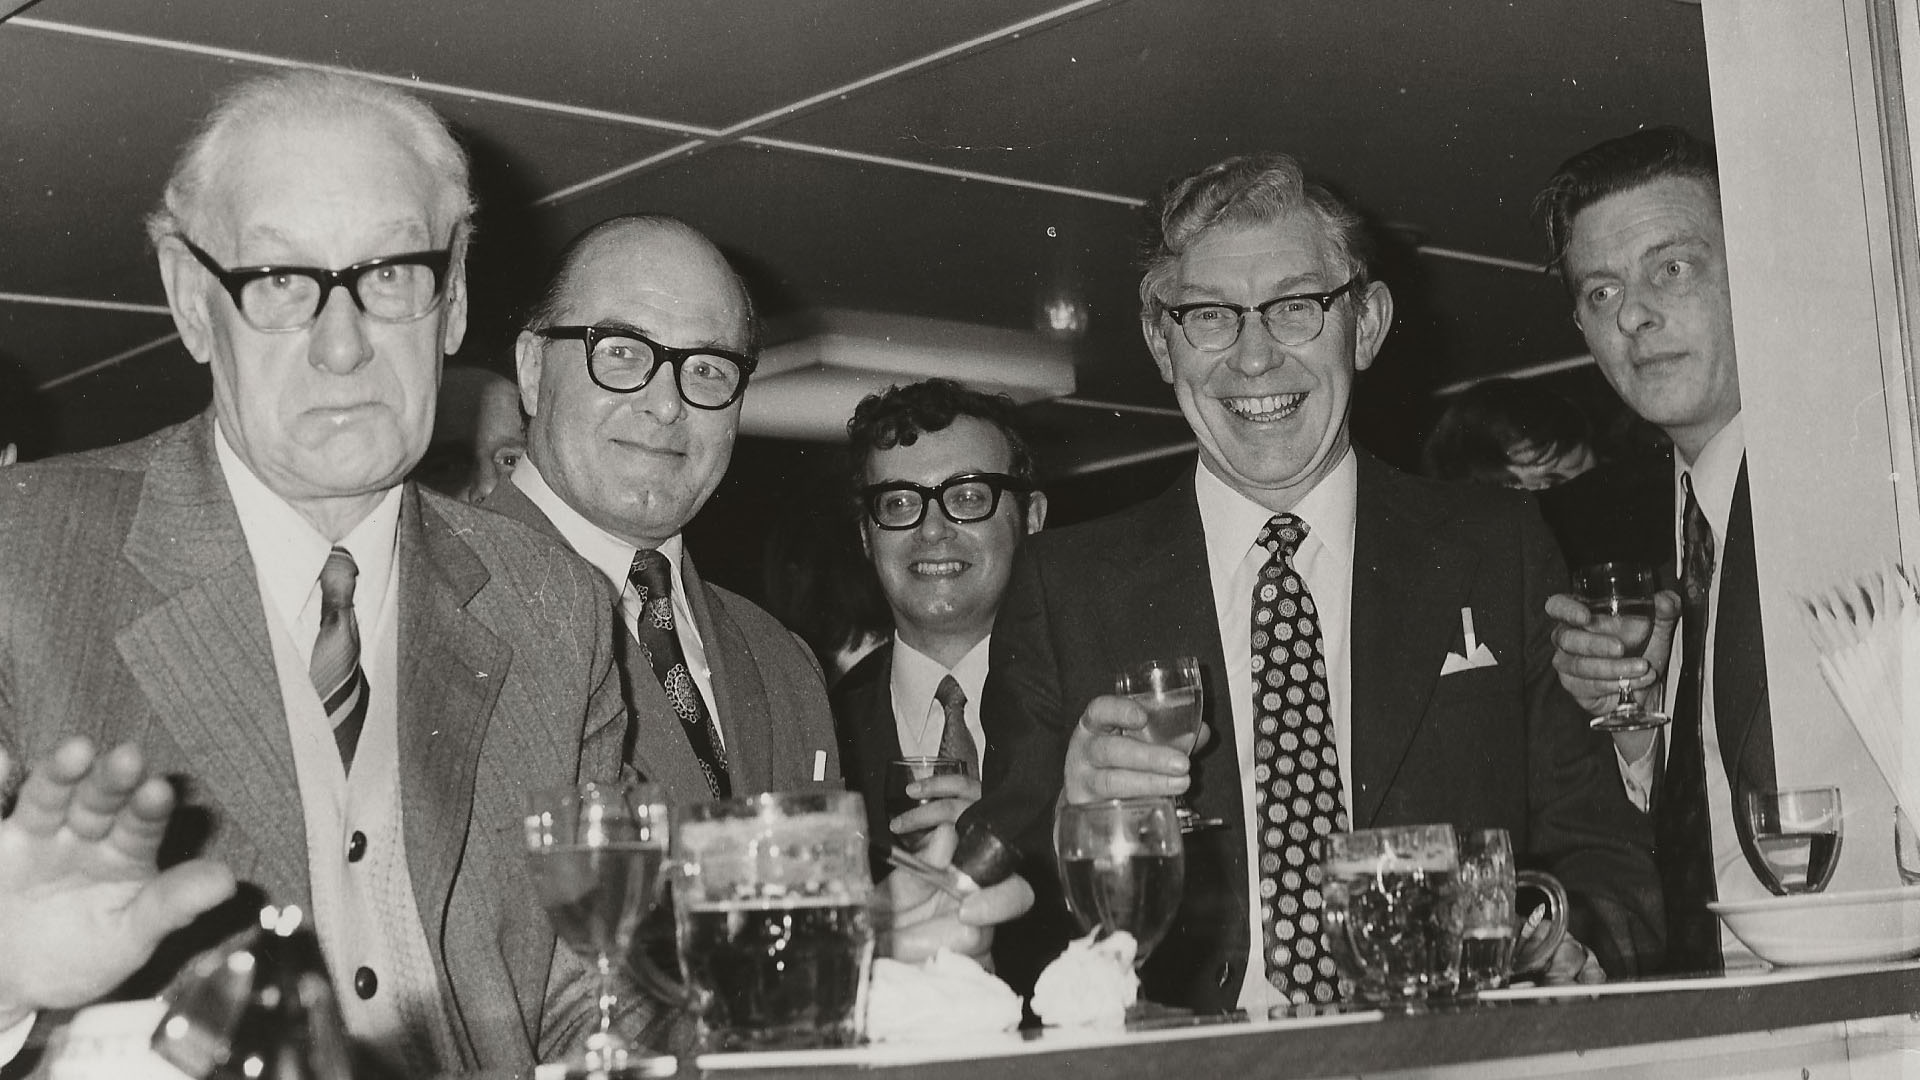 Handover celebration party on a H&W built vessel, early 1980s.